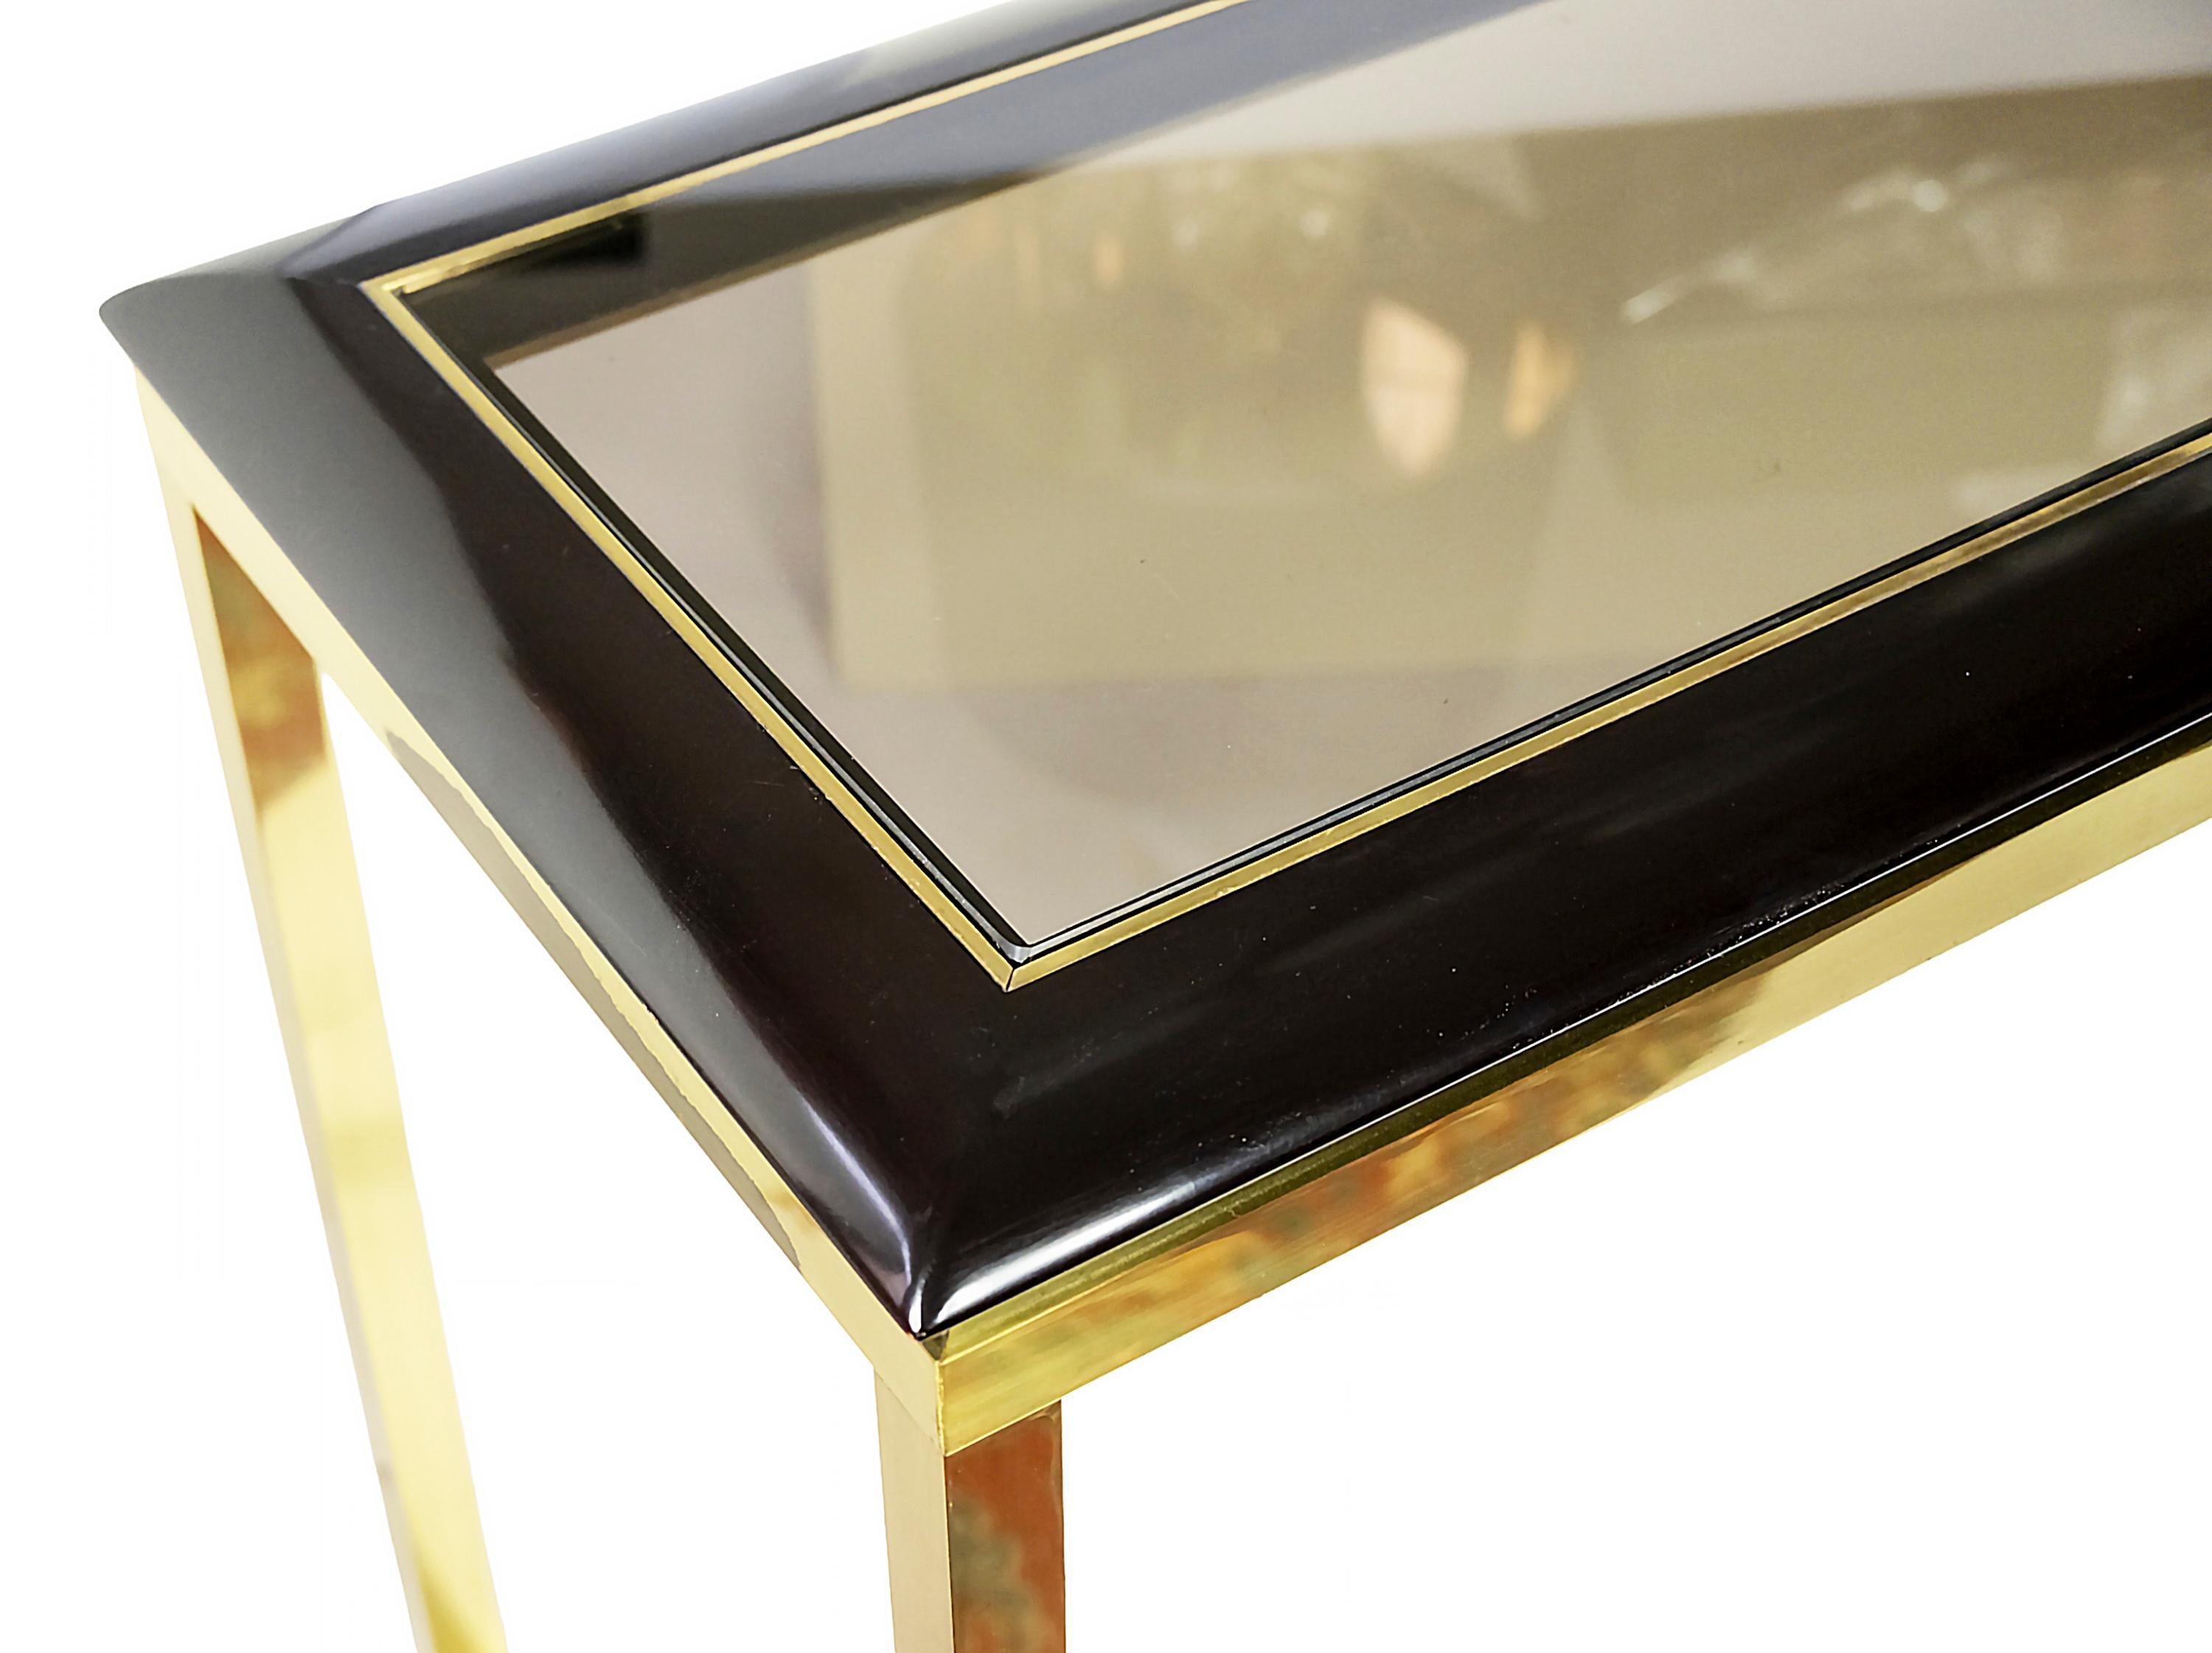 French Mid-Century Brass, Glass, Wood Console Table from 1970's